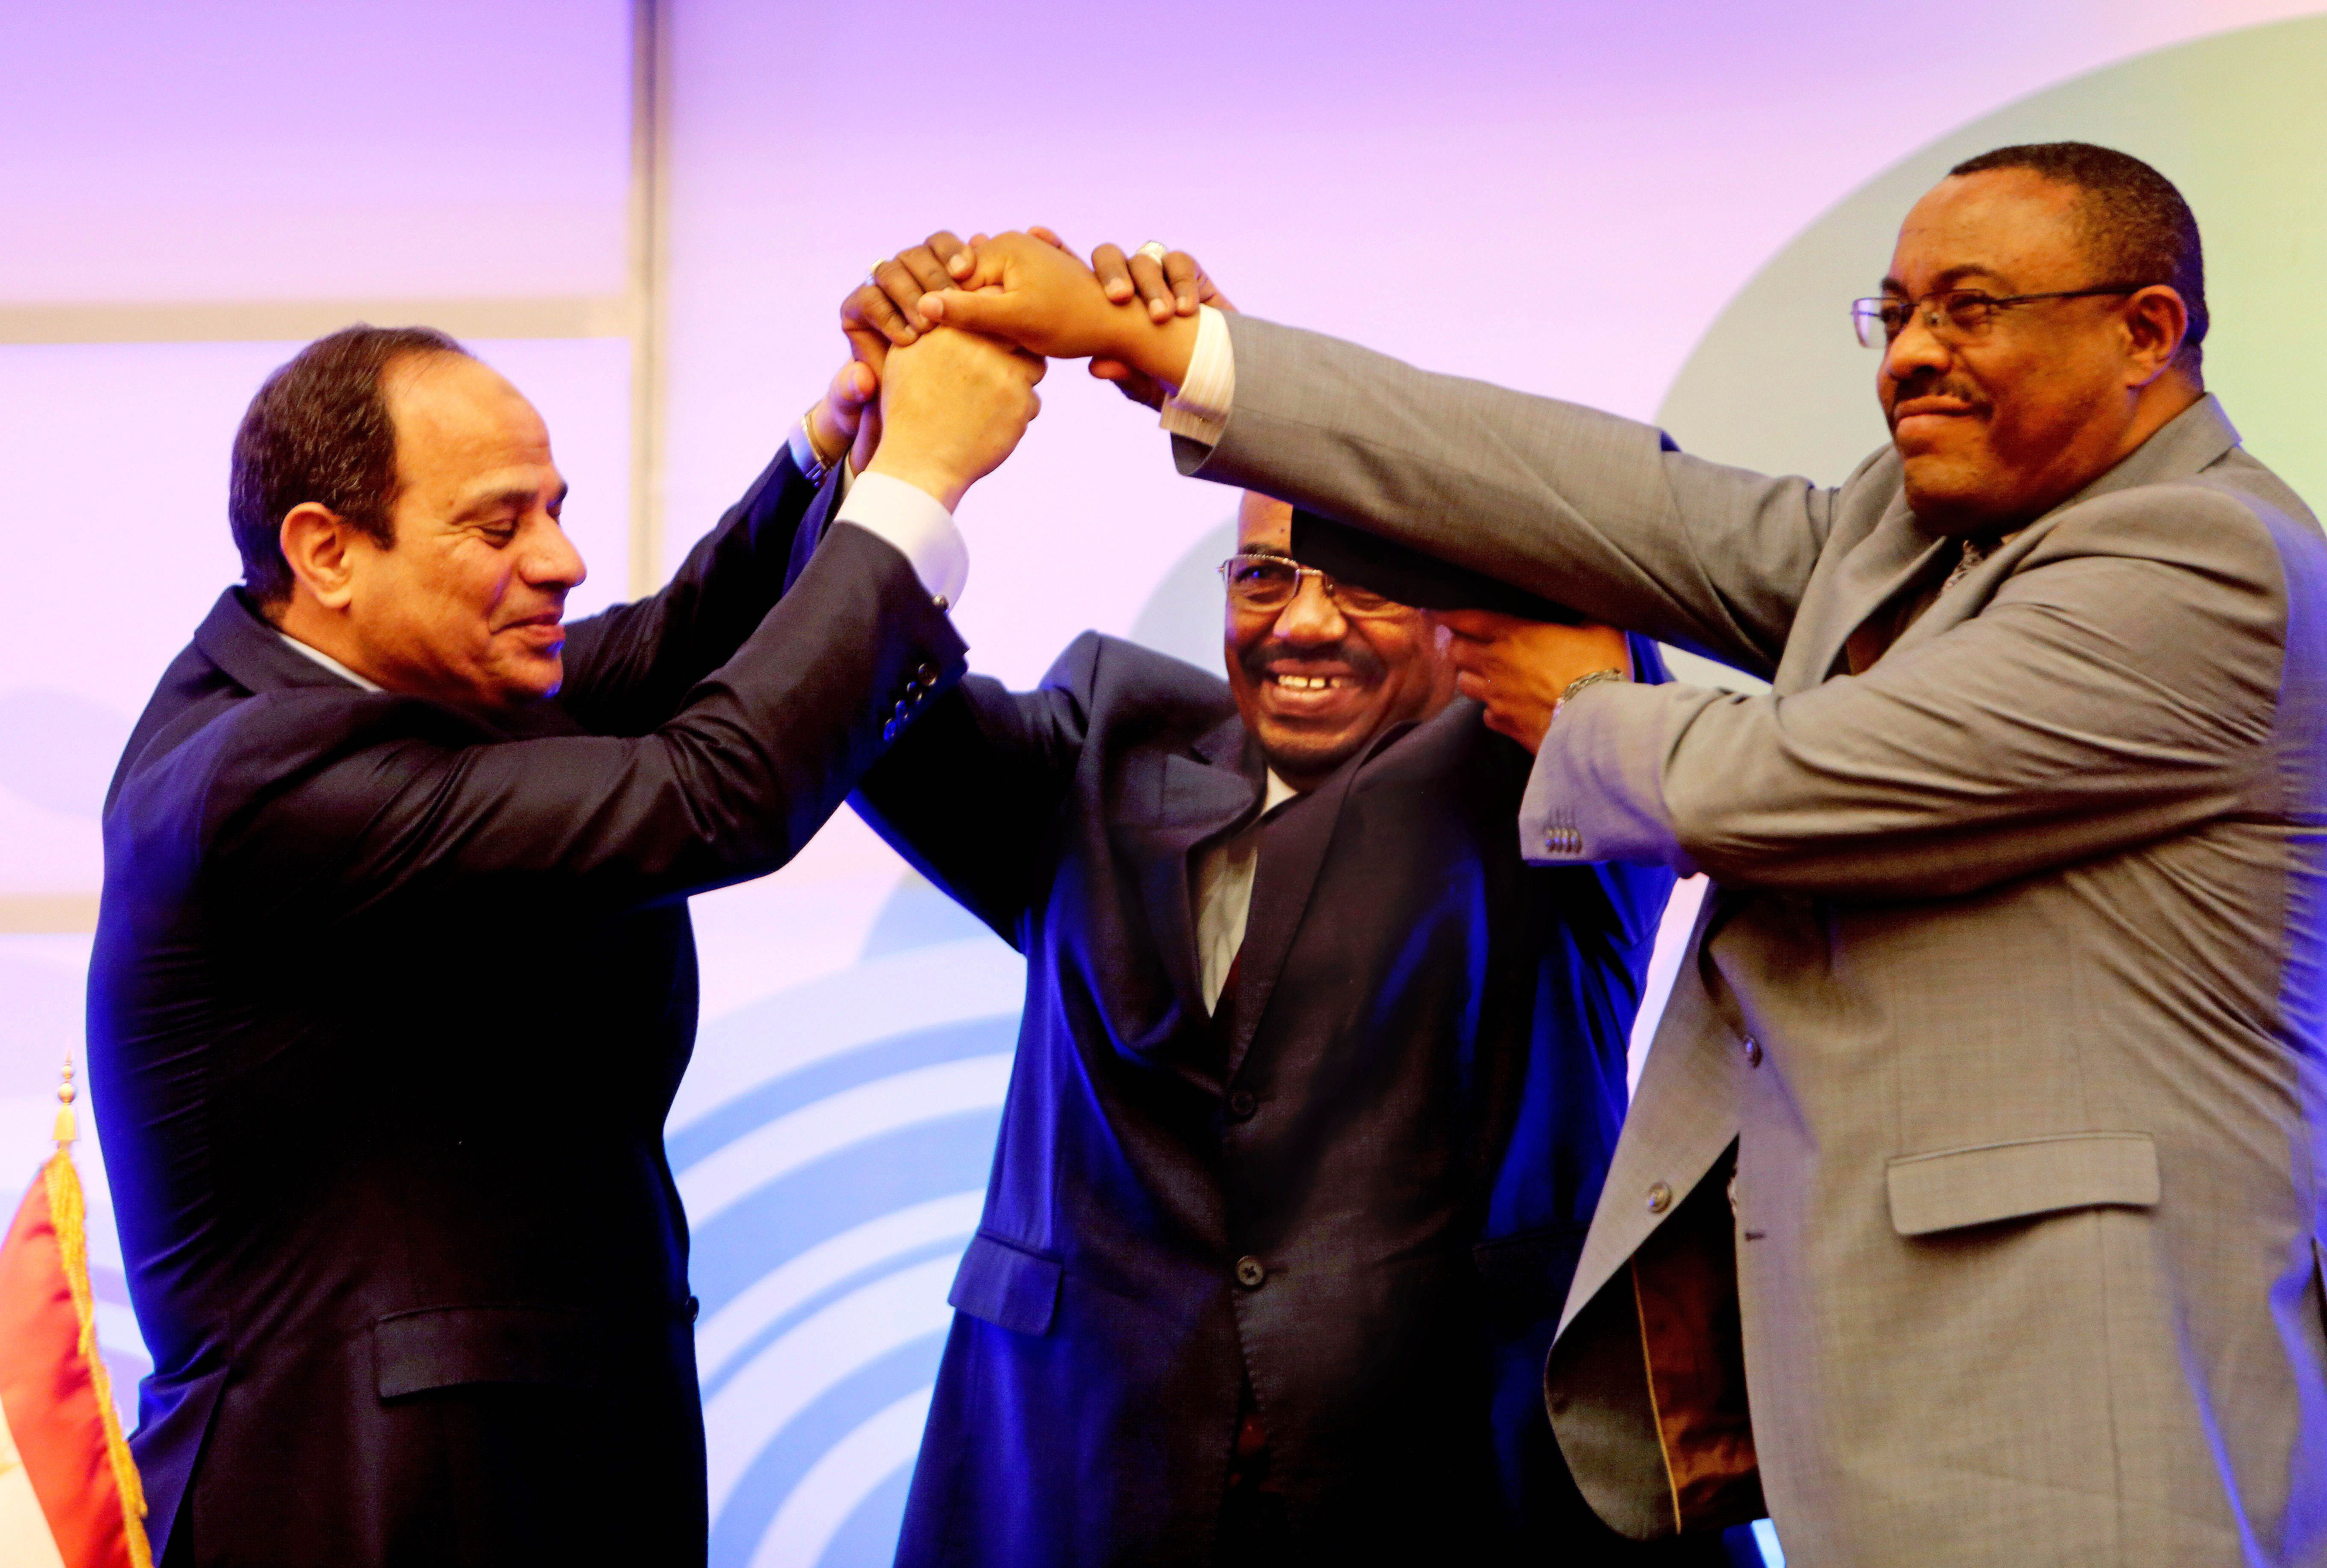 Sudanese President Omar al-Bashir, center, Egyptian President Abdel-Fattah el-Sissi, left, and Ethiopian Prime Minister Hailemariam Desalegn, right, hold hands after signing an agreement on sharing water from the Nile River, in Khartoum, Sudan, Monday, March 23, 2015. Egypt, Ethiopia and Sudan on Monday signed an initial agreement on sharing water from the Nile River that runs through the three countries, as Ethiopia constructs a massive new dam it hopes will help alleviate its electricity shortages. El-Sissi, al-Bashir and Desalegn welcomed the agreement in speeches in Khartoum’s Republican Palace on Monday. (AP Photo/Abd Raouf)